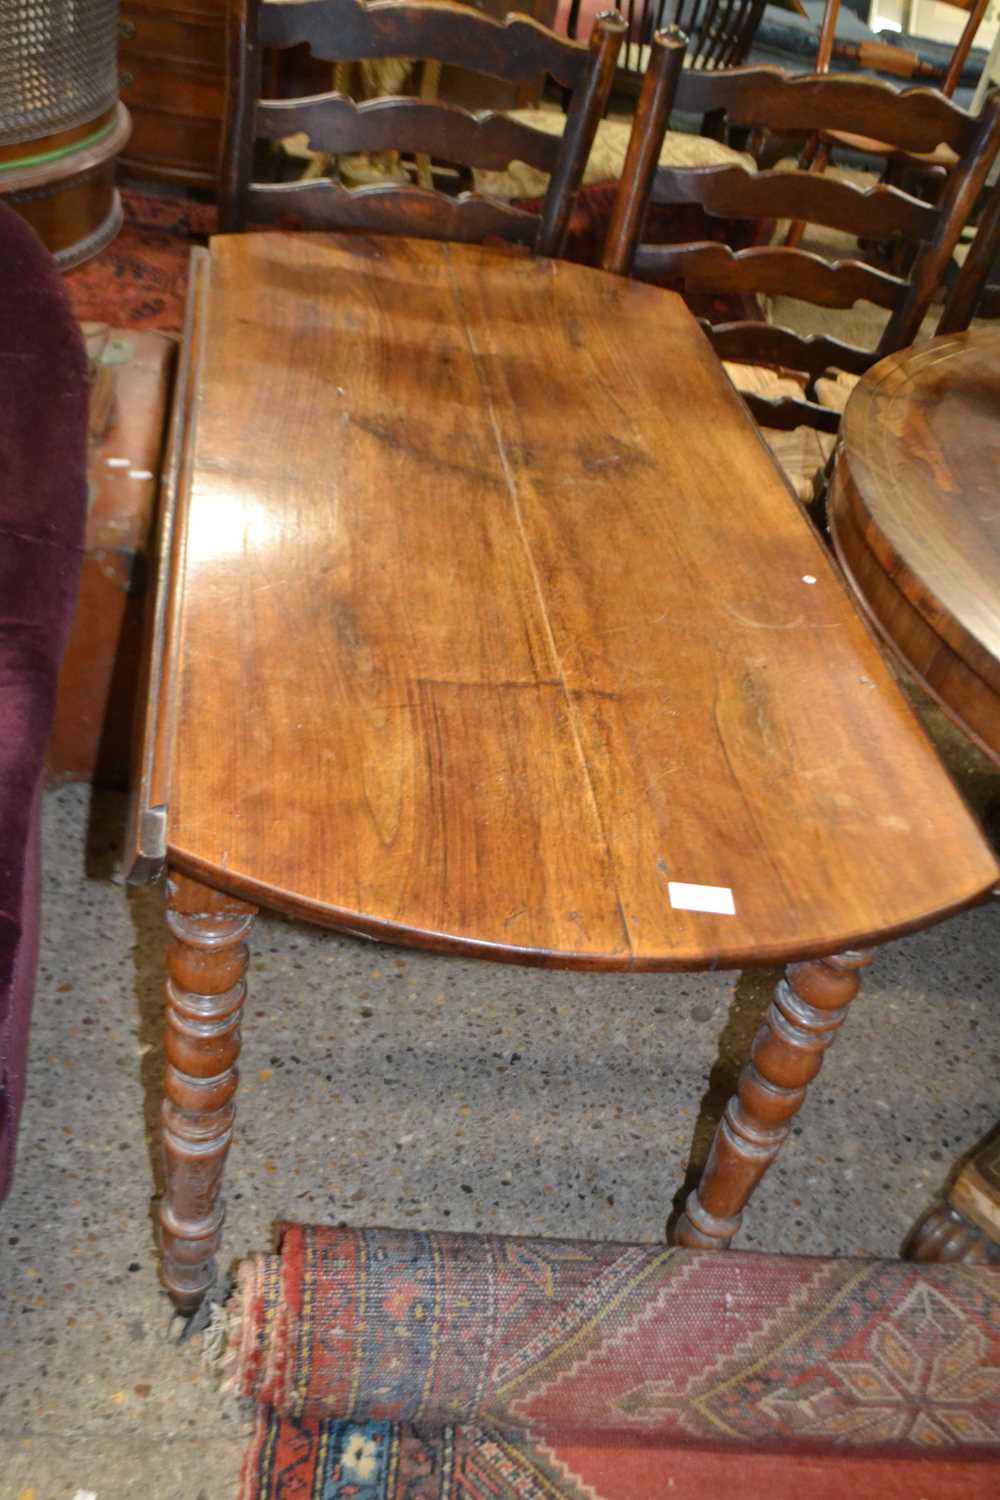 Drop leaf table with turned feet